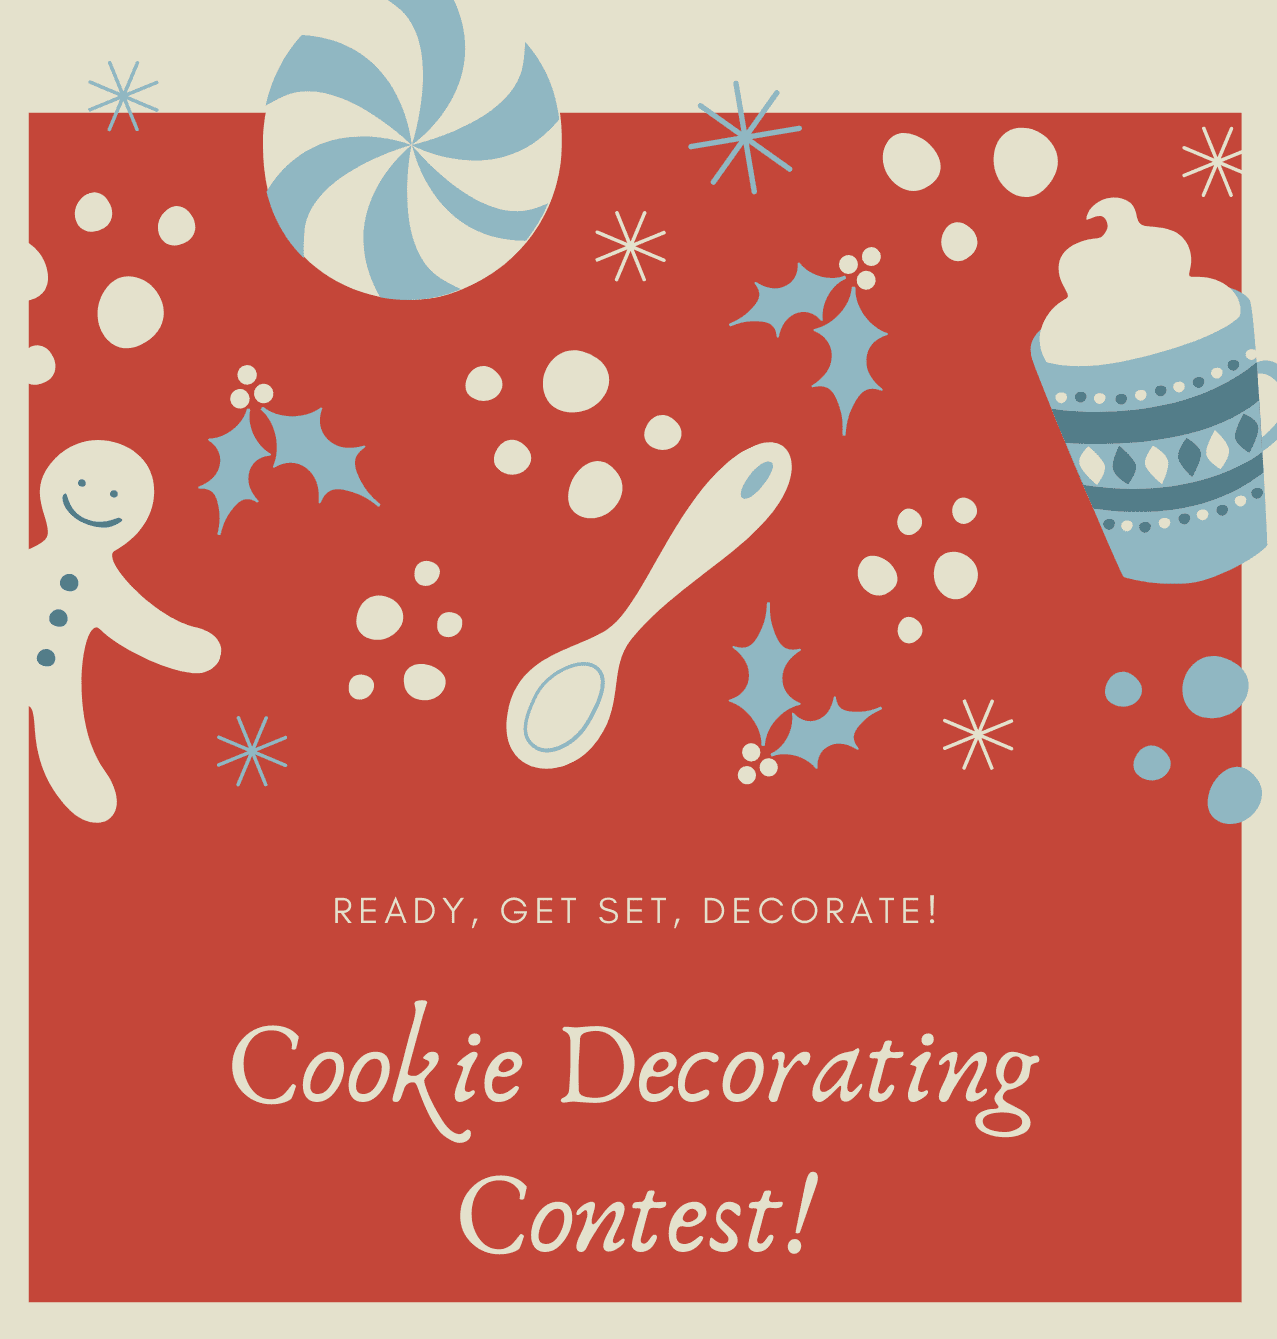 Ready, Get Set, Decorate! Cookie Decorating Contest